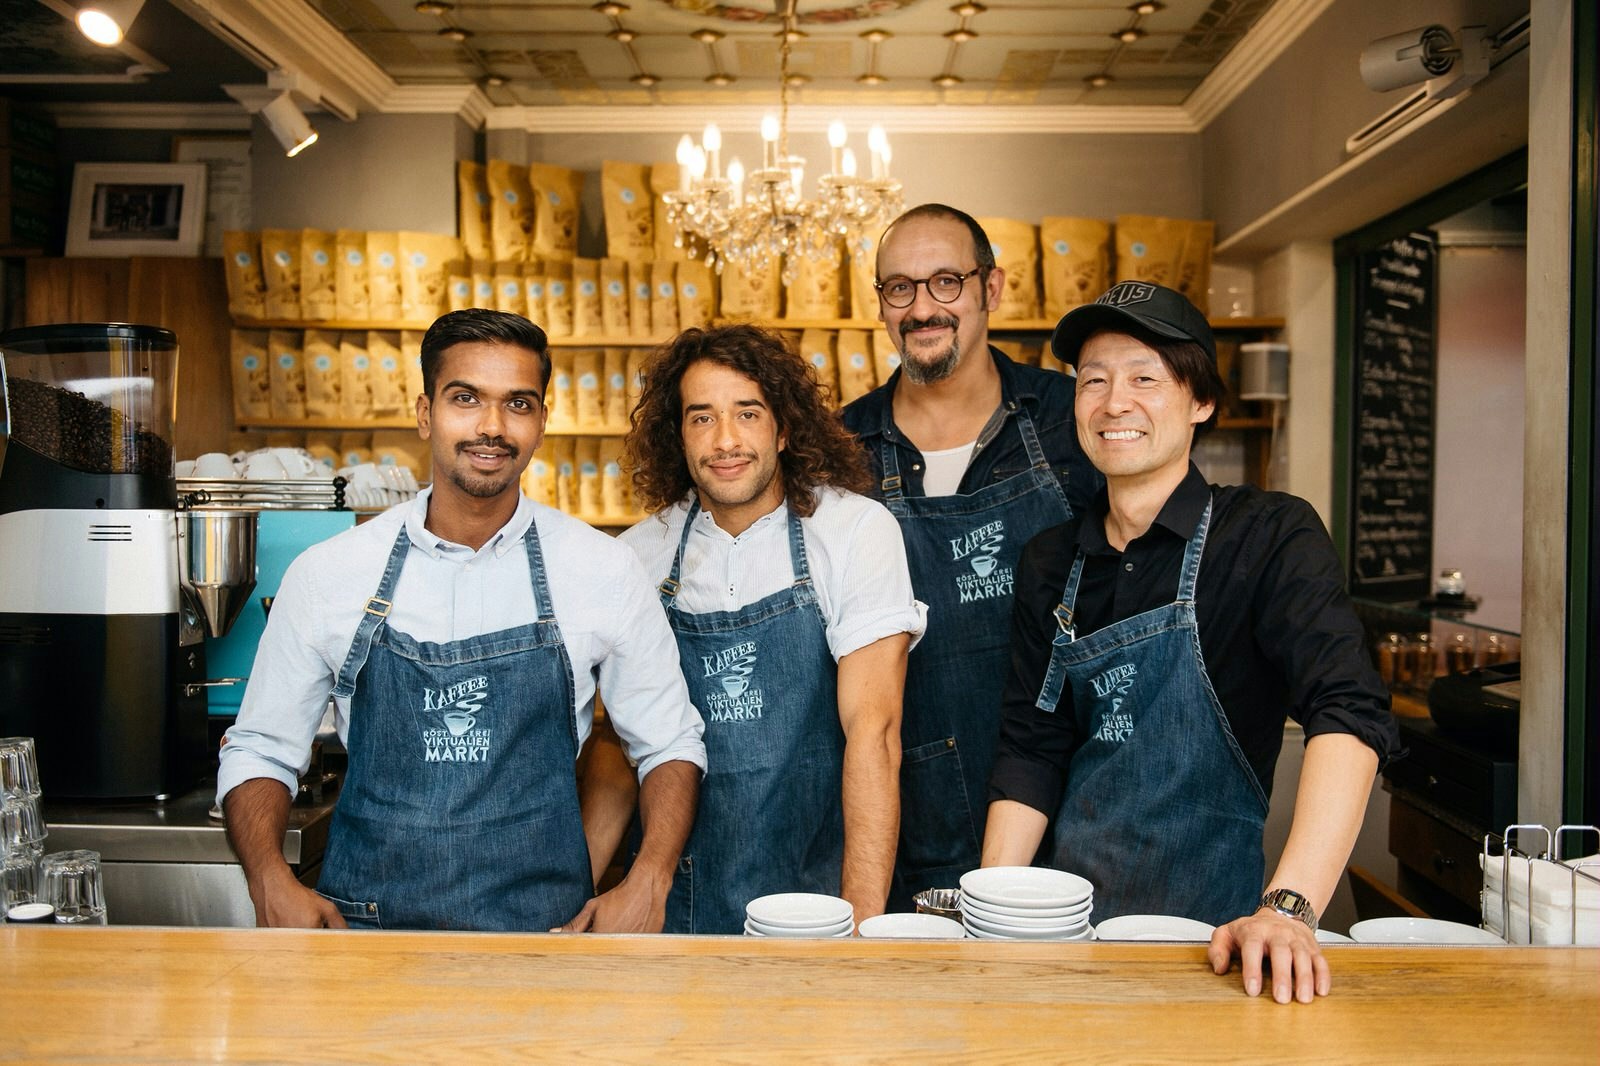 Four men wearing denim aprons with the kaffeerosterei logo embroidered on them stand behind a wooden counter smiling at the camera. Behind them, out of focus, there are shelves stacked with bags of coffee beans and a chandelier hanging from an ornately-decorated ceiling. 